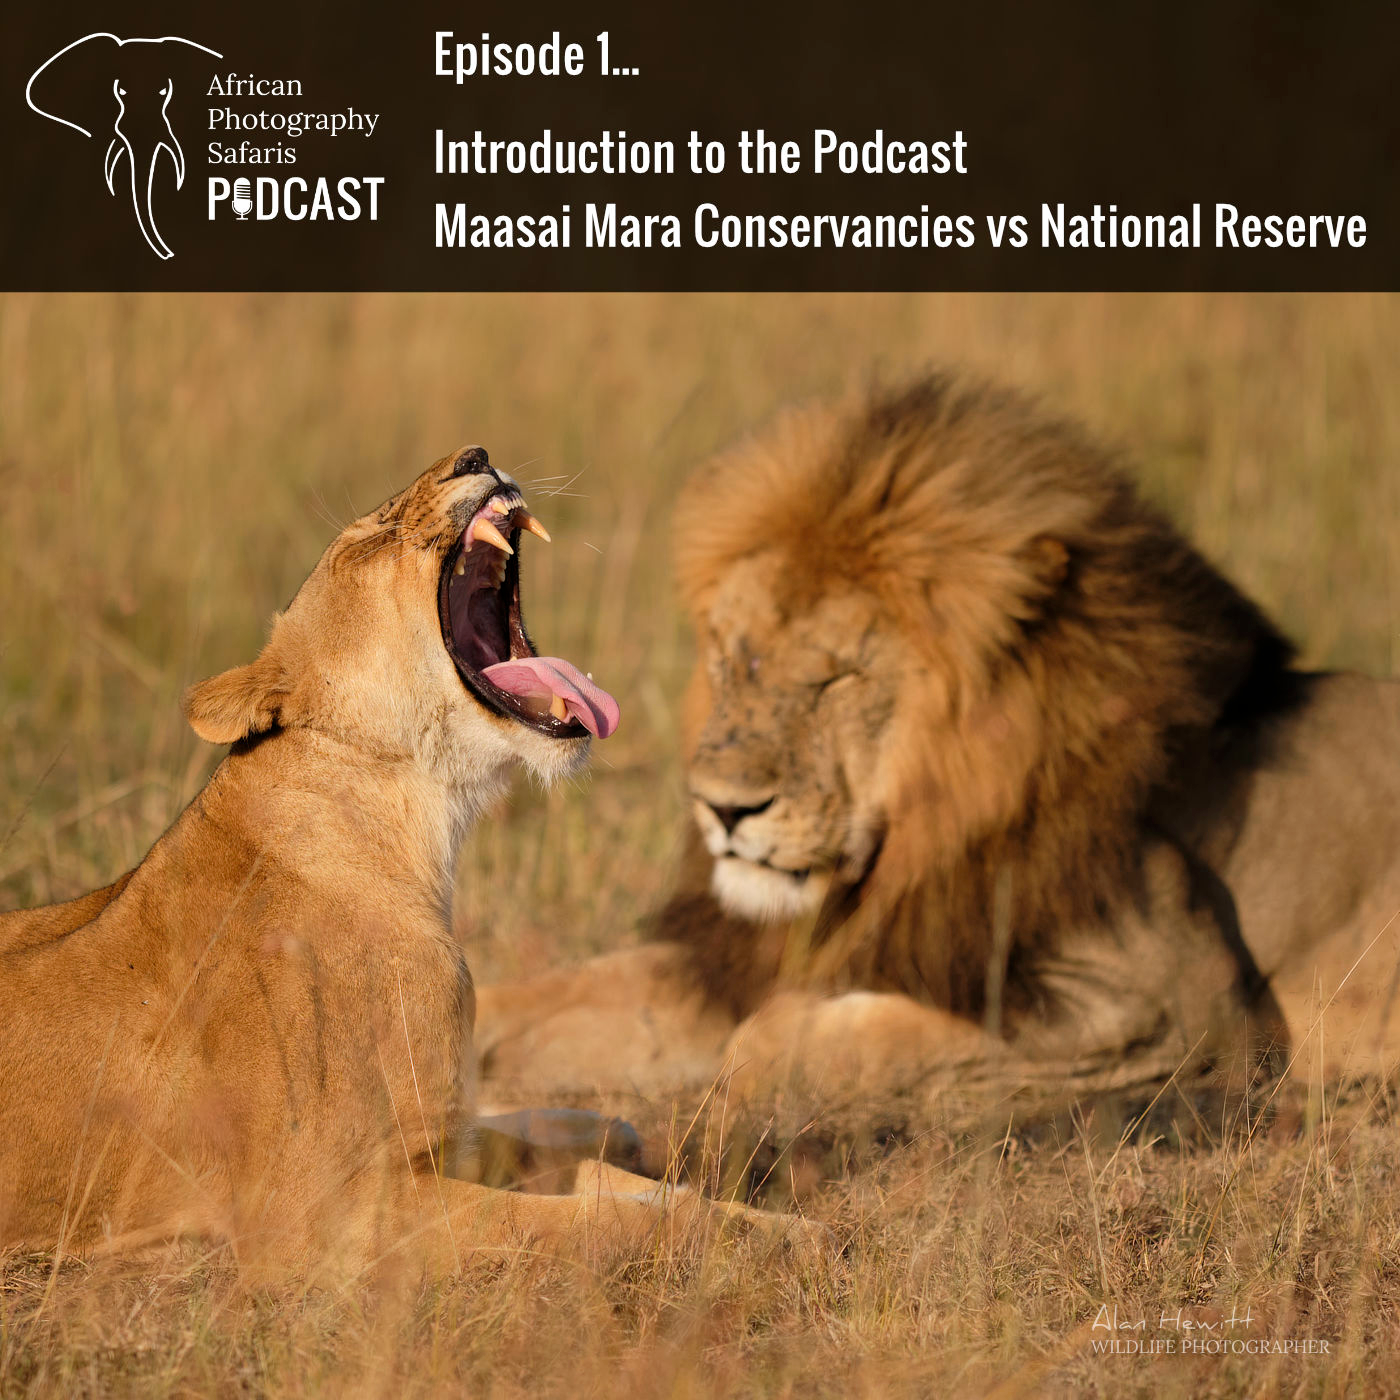 African Photography Safaris Podcast. Episode 1 - Introduction to the Podcast and Maasai Mara Conservancies vs National Reserve